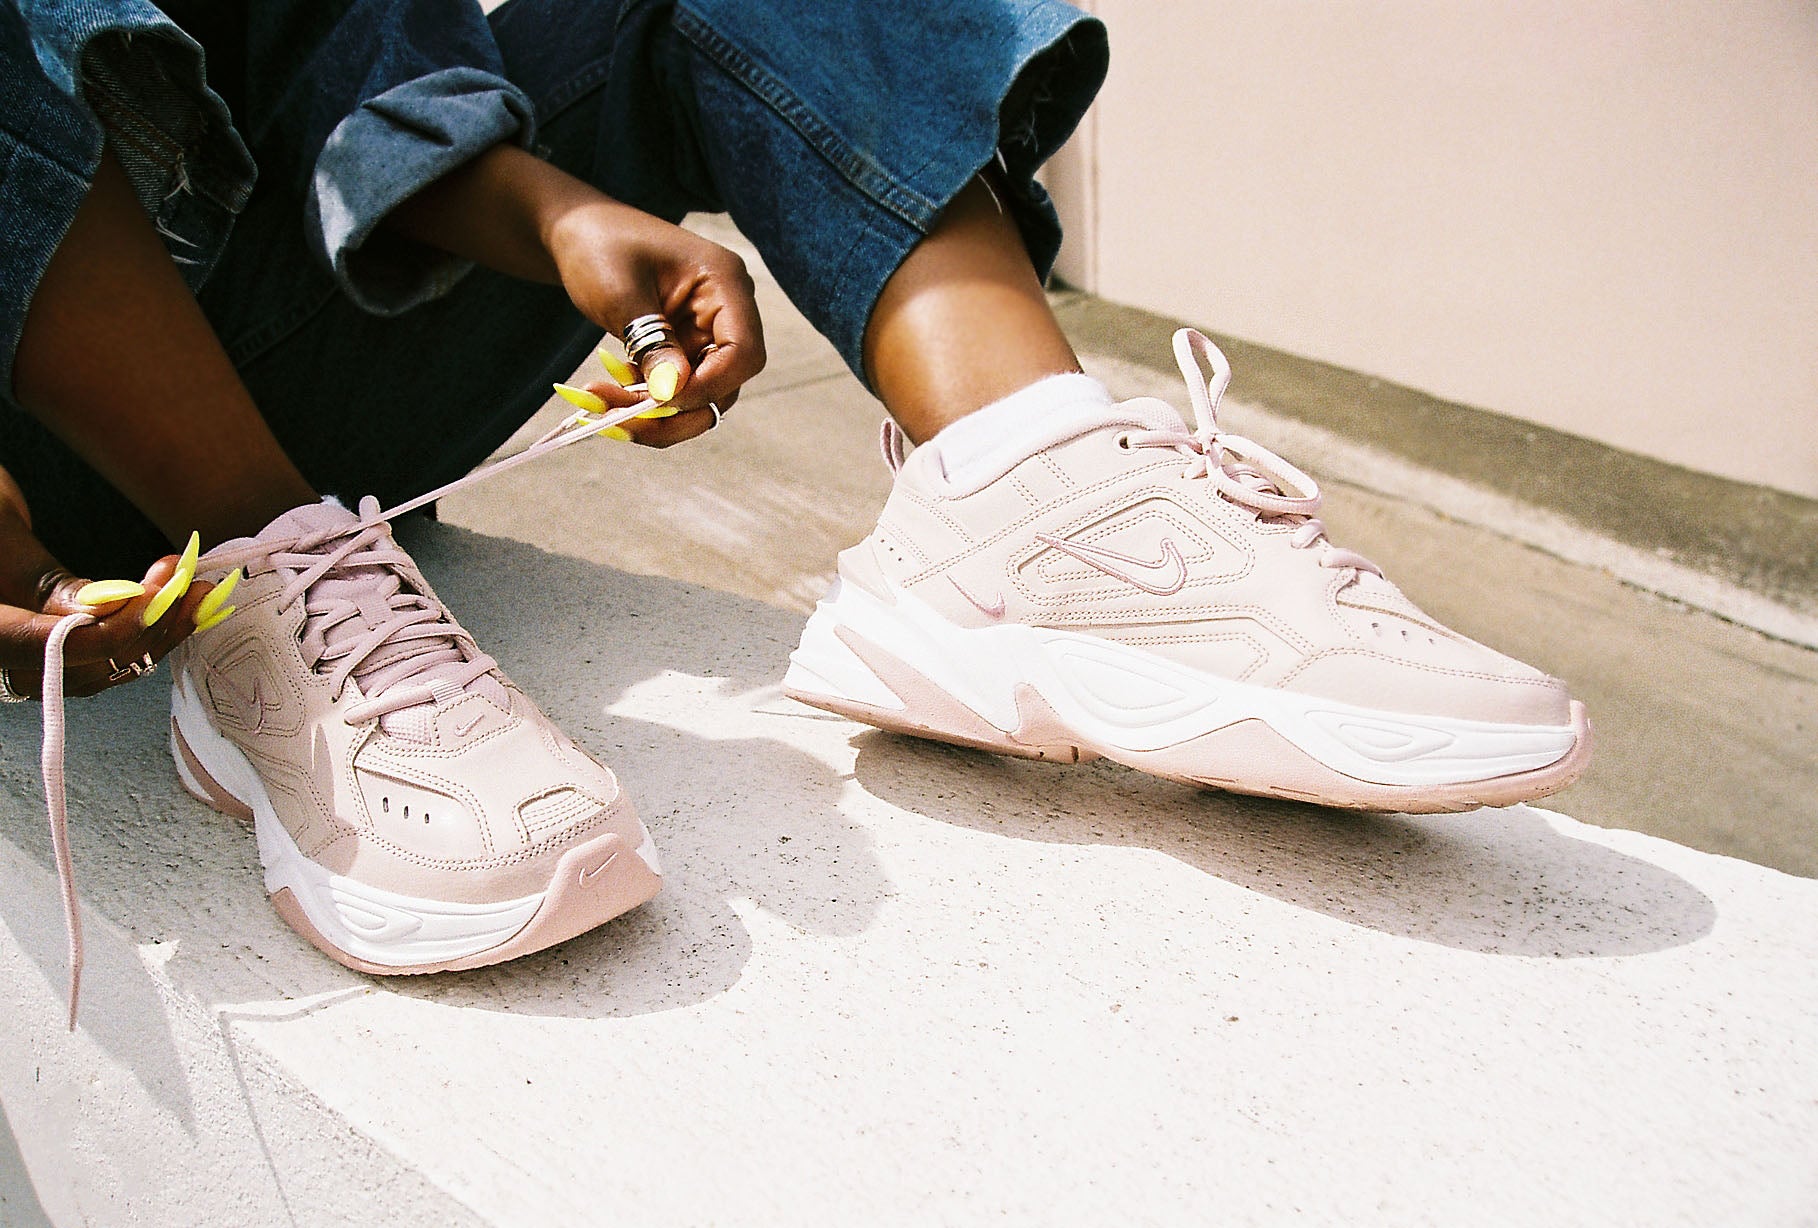 Nike M2k Tekno Particle Beige October 1 Sneaker Releases Sole Finess